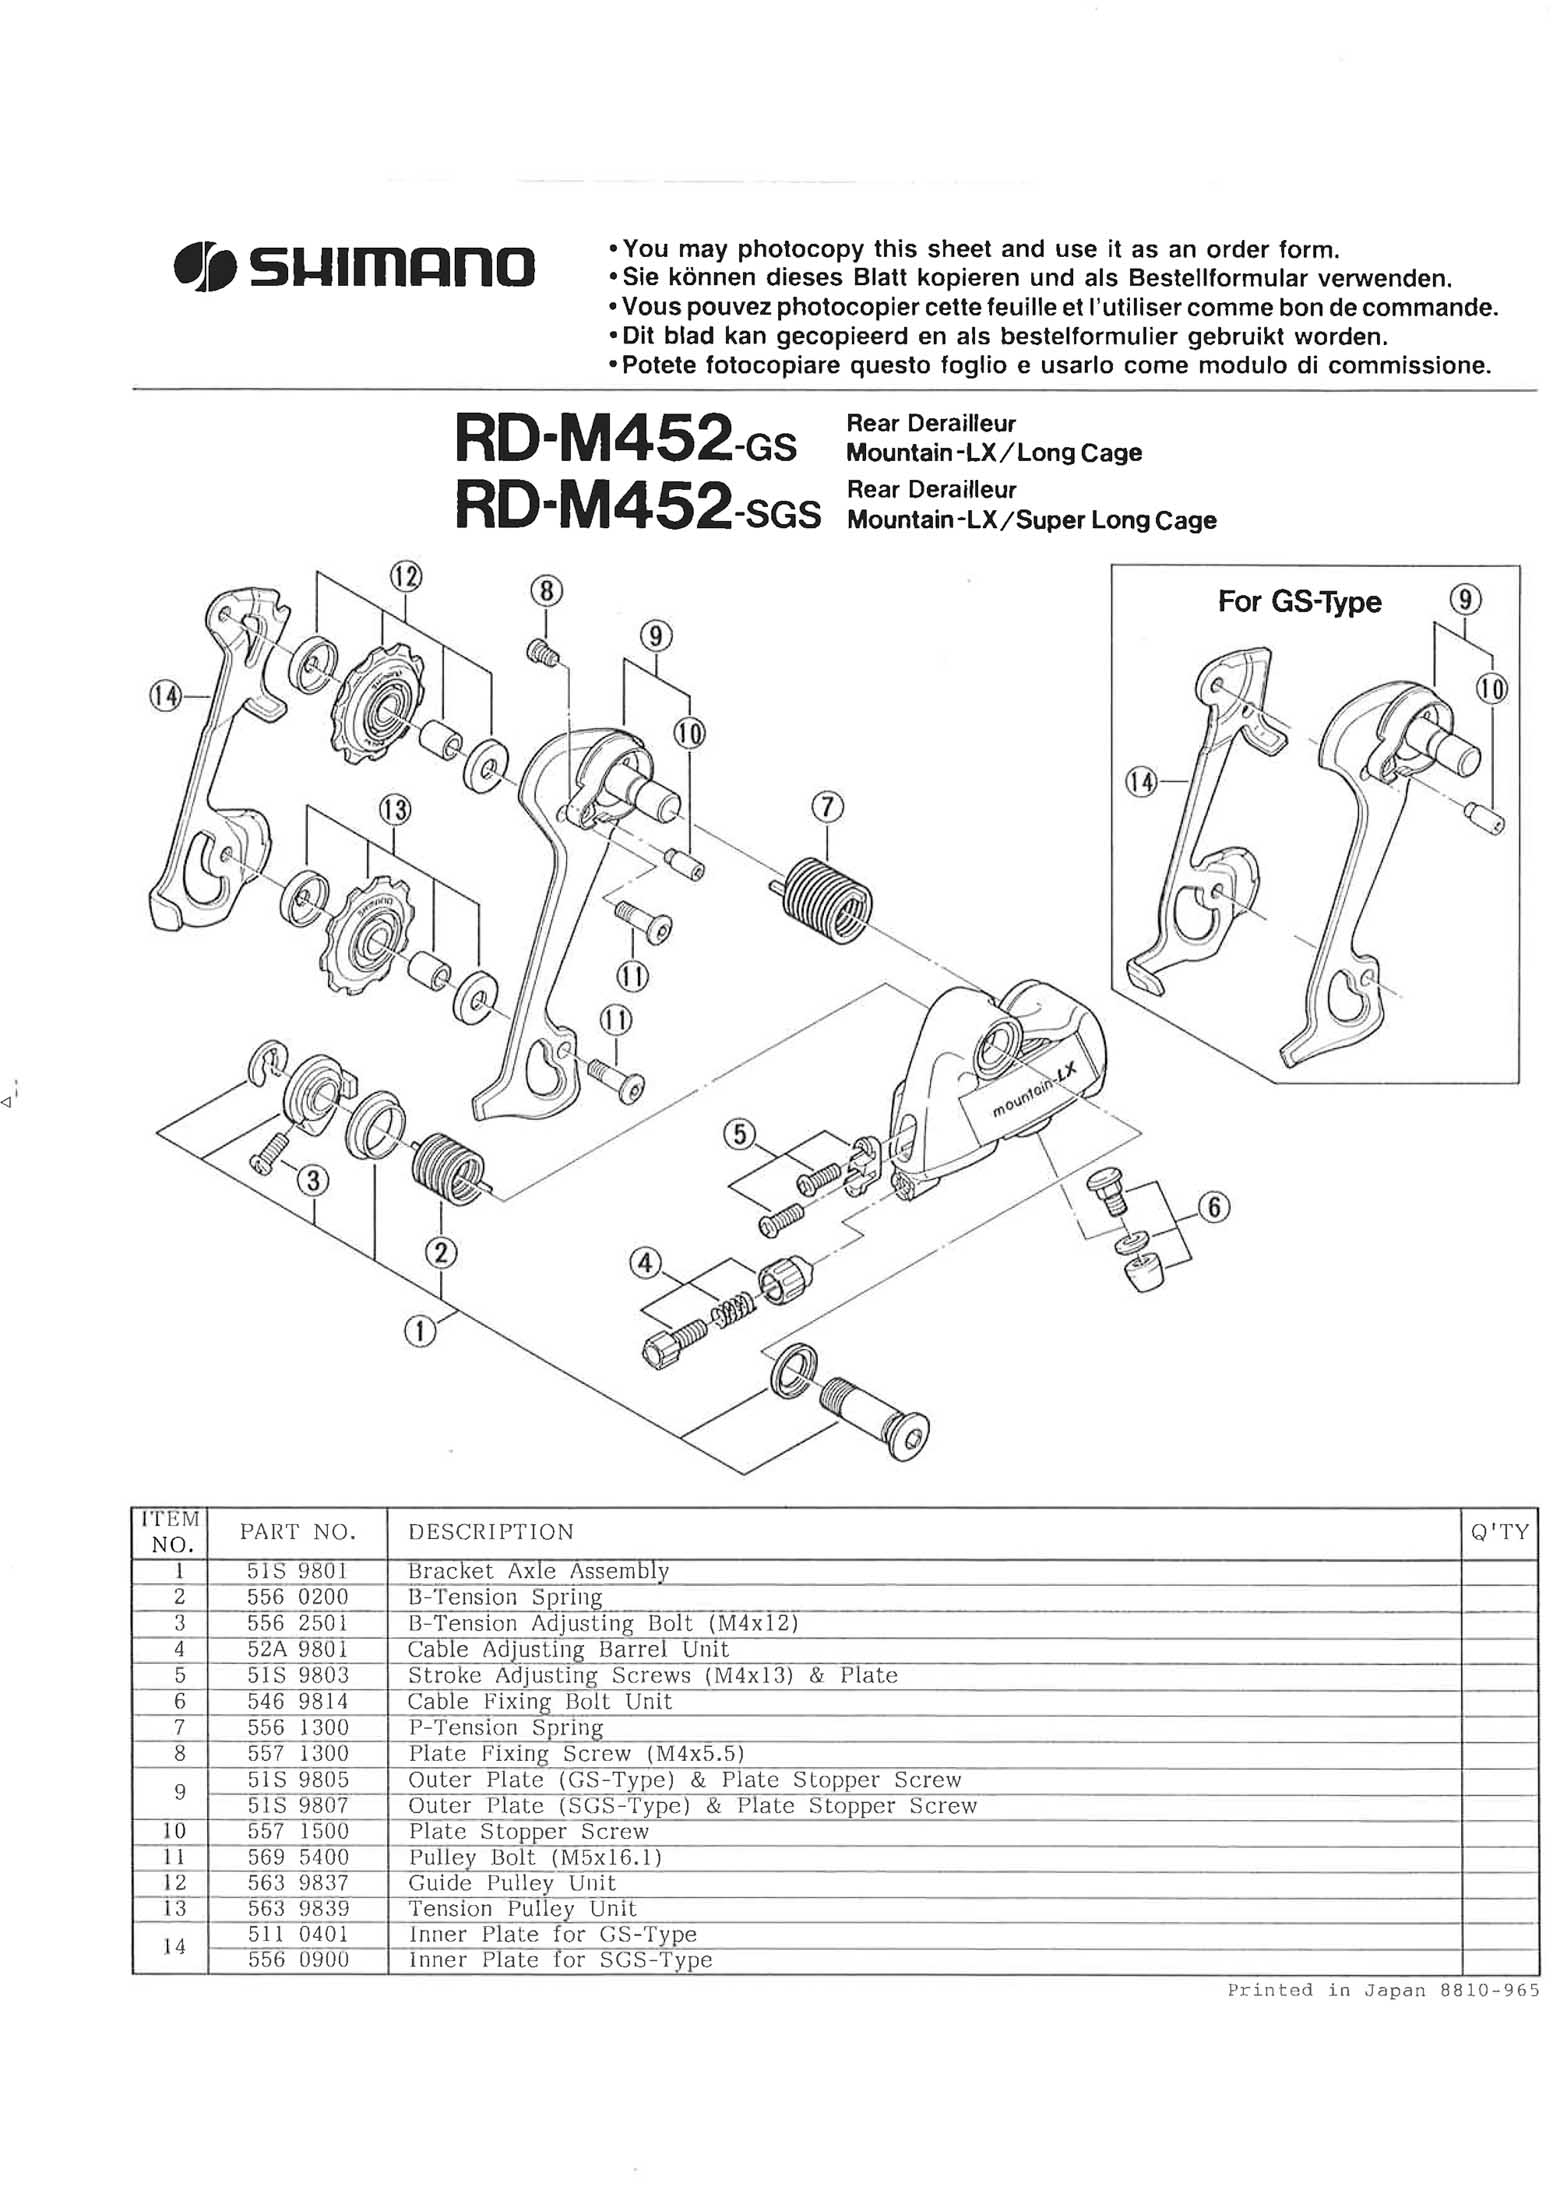 Shimano web site 2020 - exploded views from 1988 Mountain LX (M452 series) main image